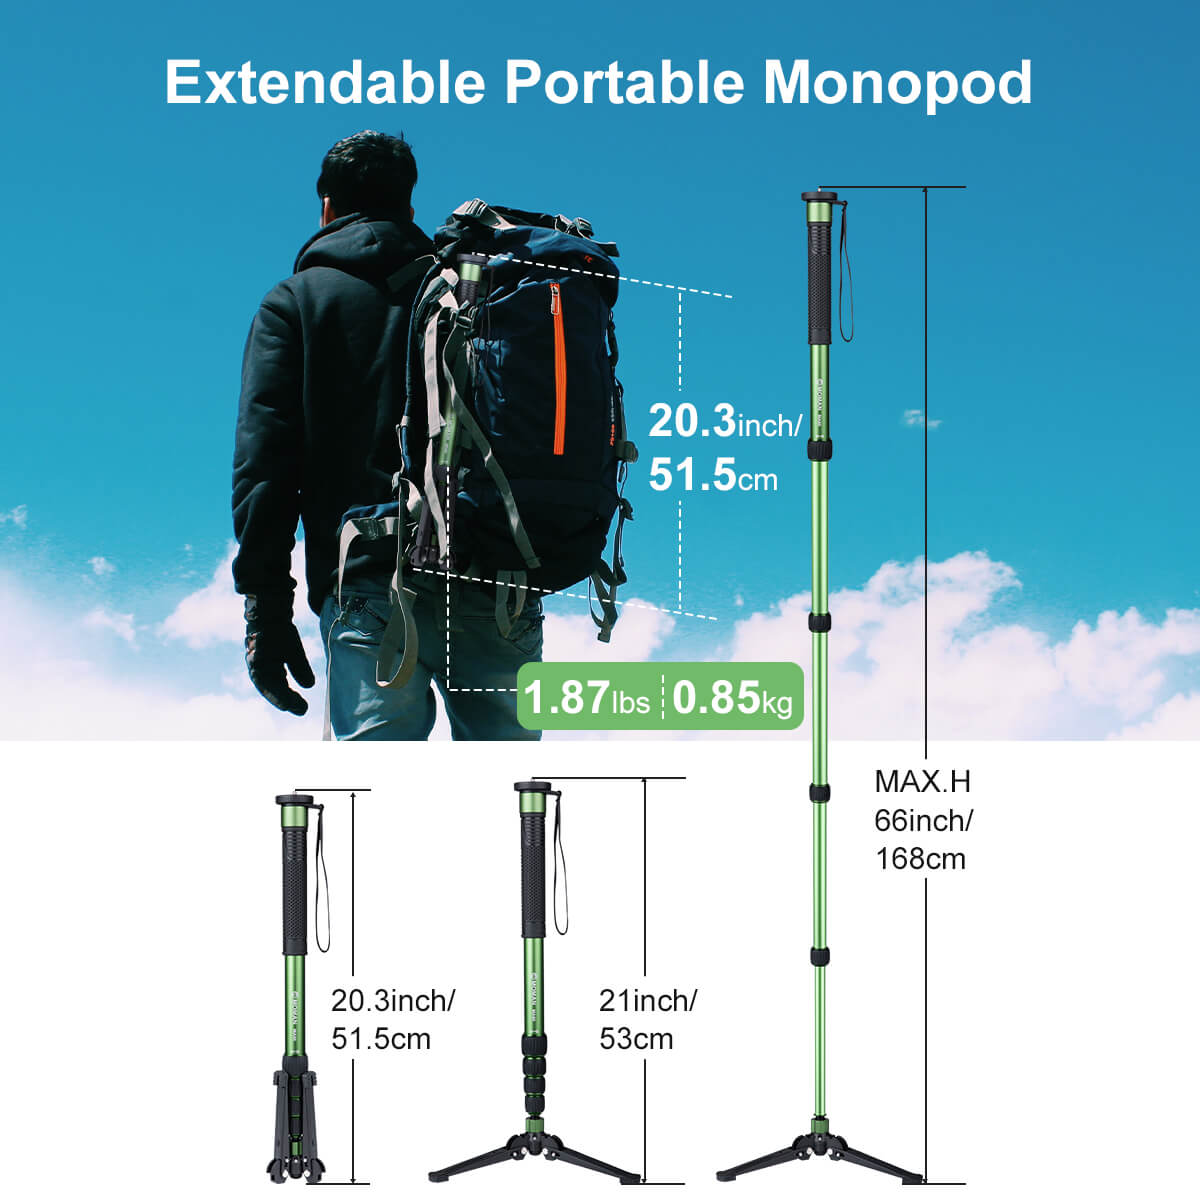 Moman MA66 is extendable. Its max. height of 168cm is suitable for most photographers while it's portable to shorten to 51.5cm for packing